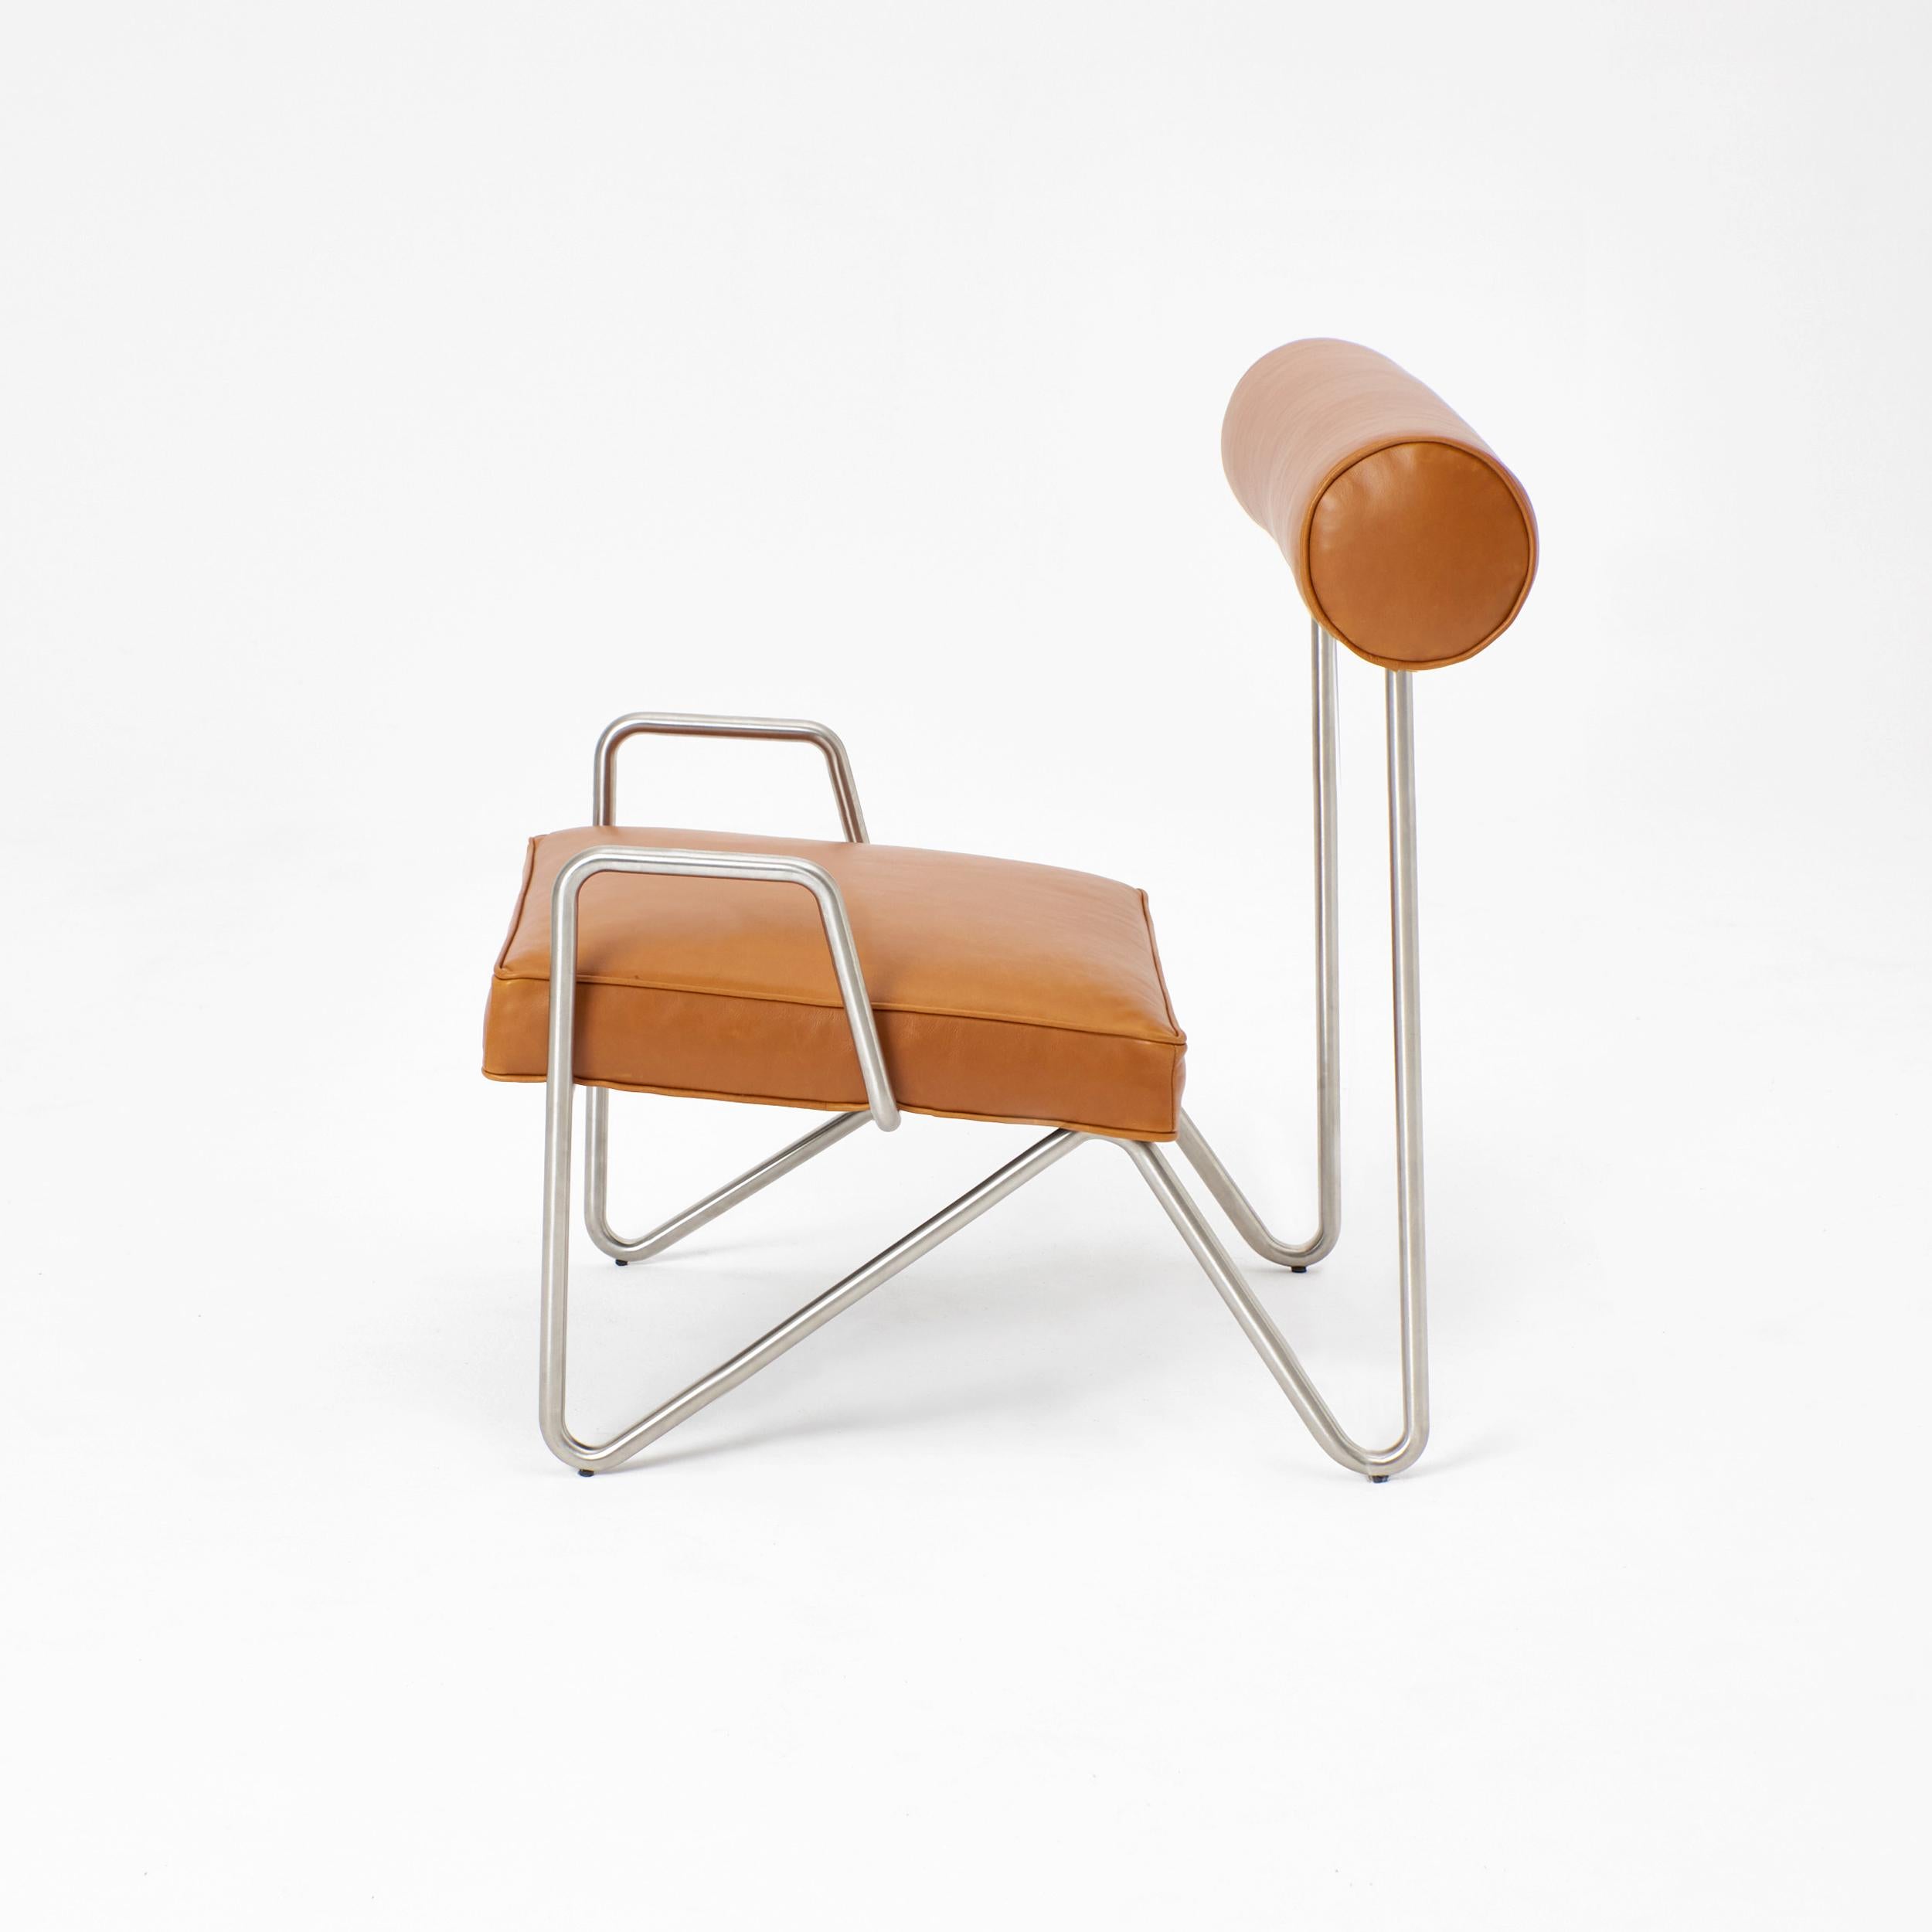 Larry's Lounge chair in Tan leather, designed by project 213A in 2022

The frame is engineered by shaping a single metal rod to yield an elegant, minimalistic design. Combined with rich sustainable leather of the seat and the backrest. The lounge